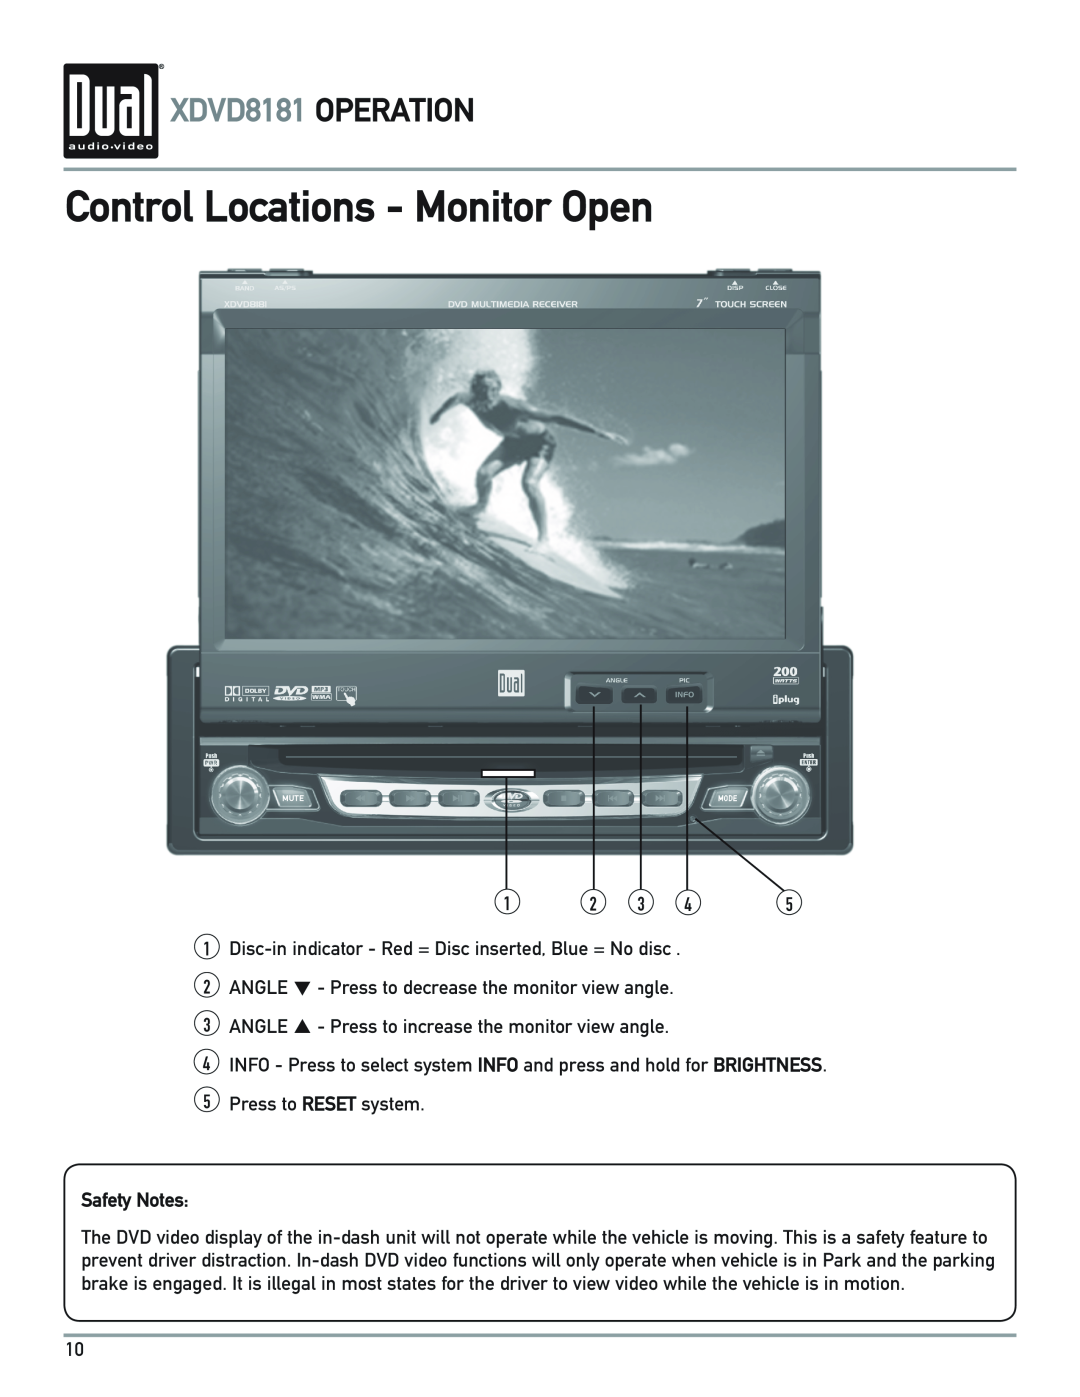 Dual owner manual Control Locations - Monitor Open, XDVD8181 OPERATION, Safety Notes 